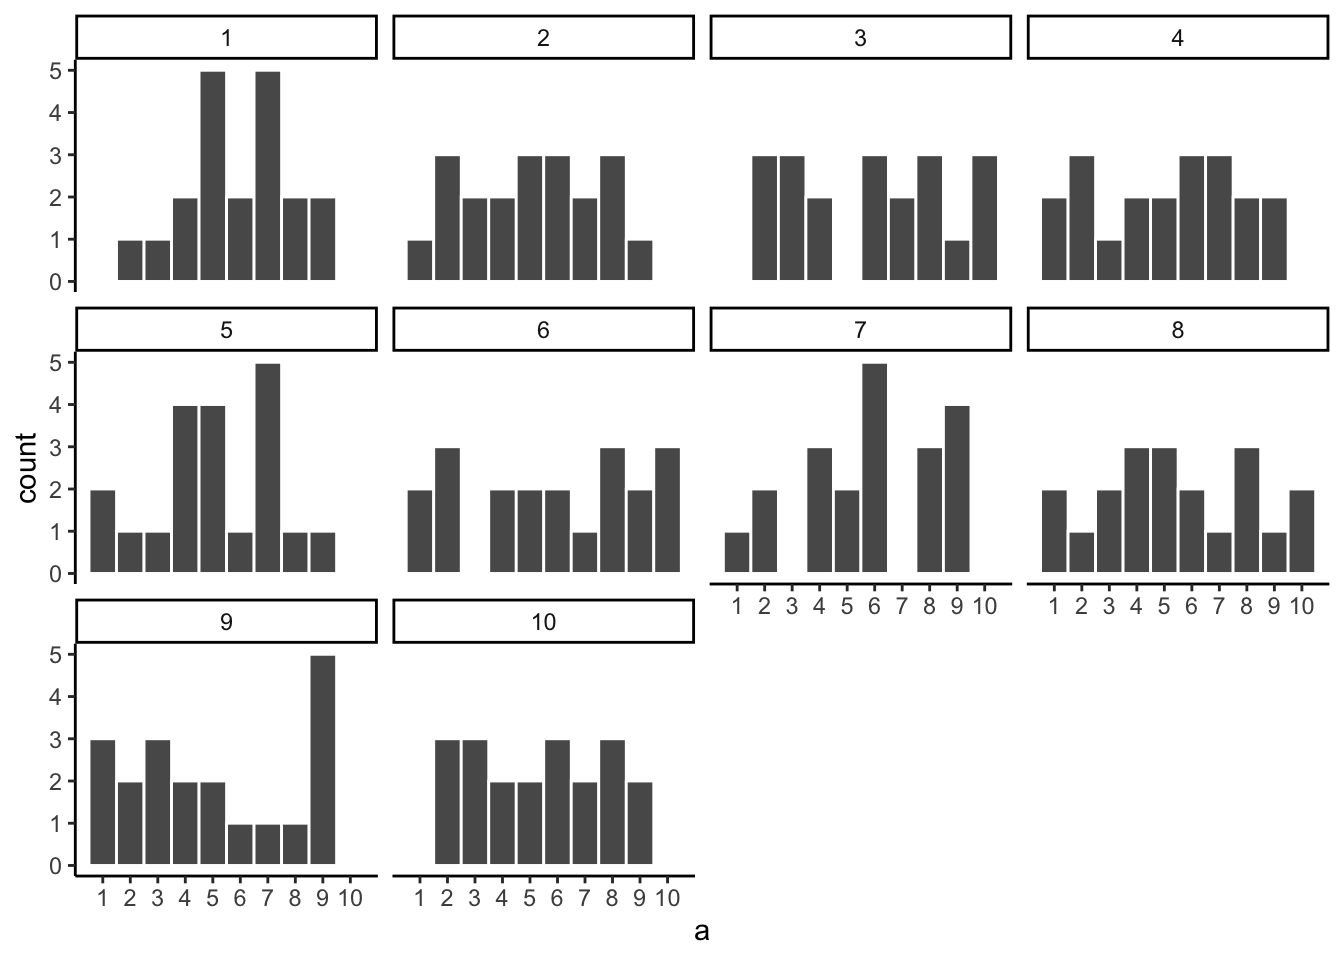 Histograms for 10 different samples from the uniform distribution. They all look quite different. The differences between the samples are due to sampling error